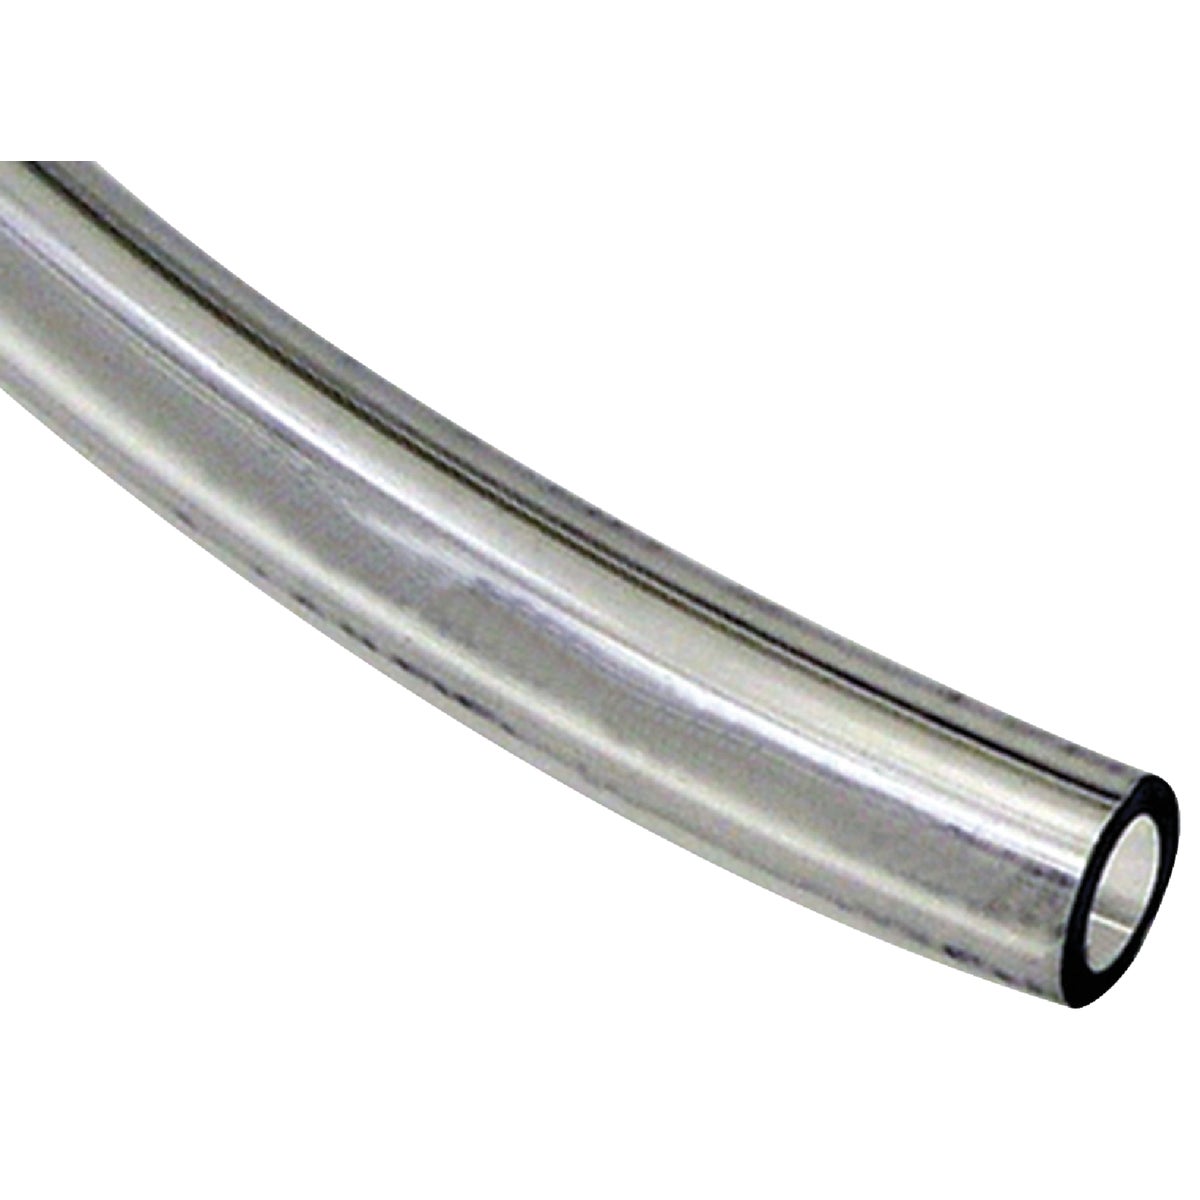 Item 400203, Clear vinyl tubing. Suitable for use with liquids, chemicals, and gases.